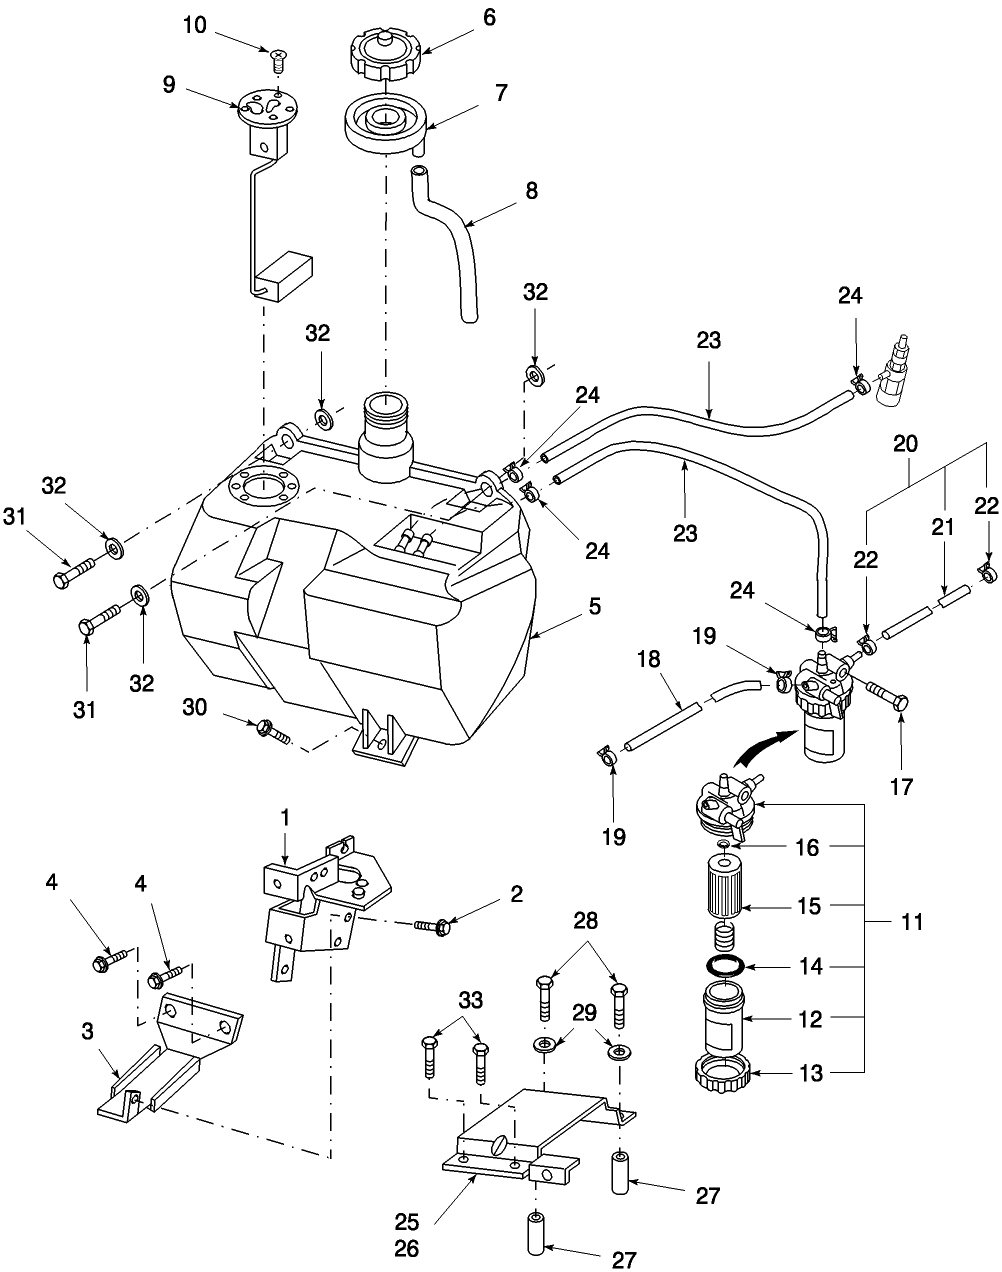 09A01 FUEL TANK & RELATED PARTS